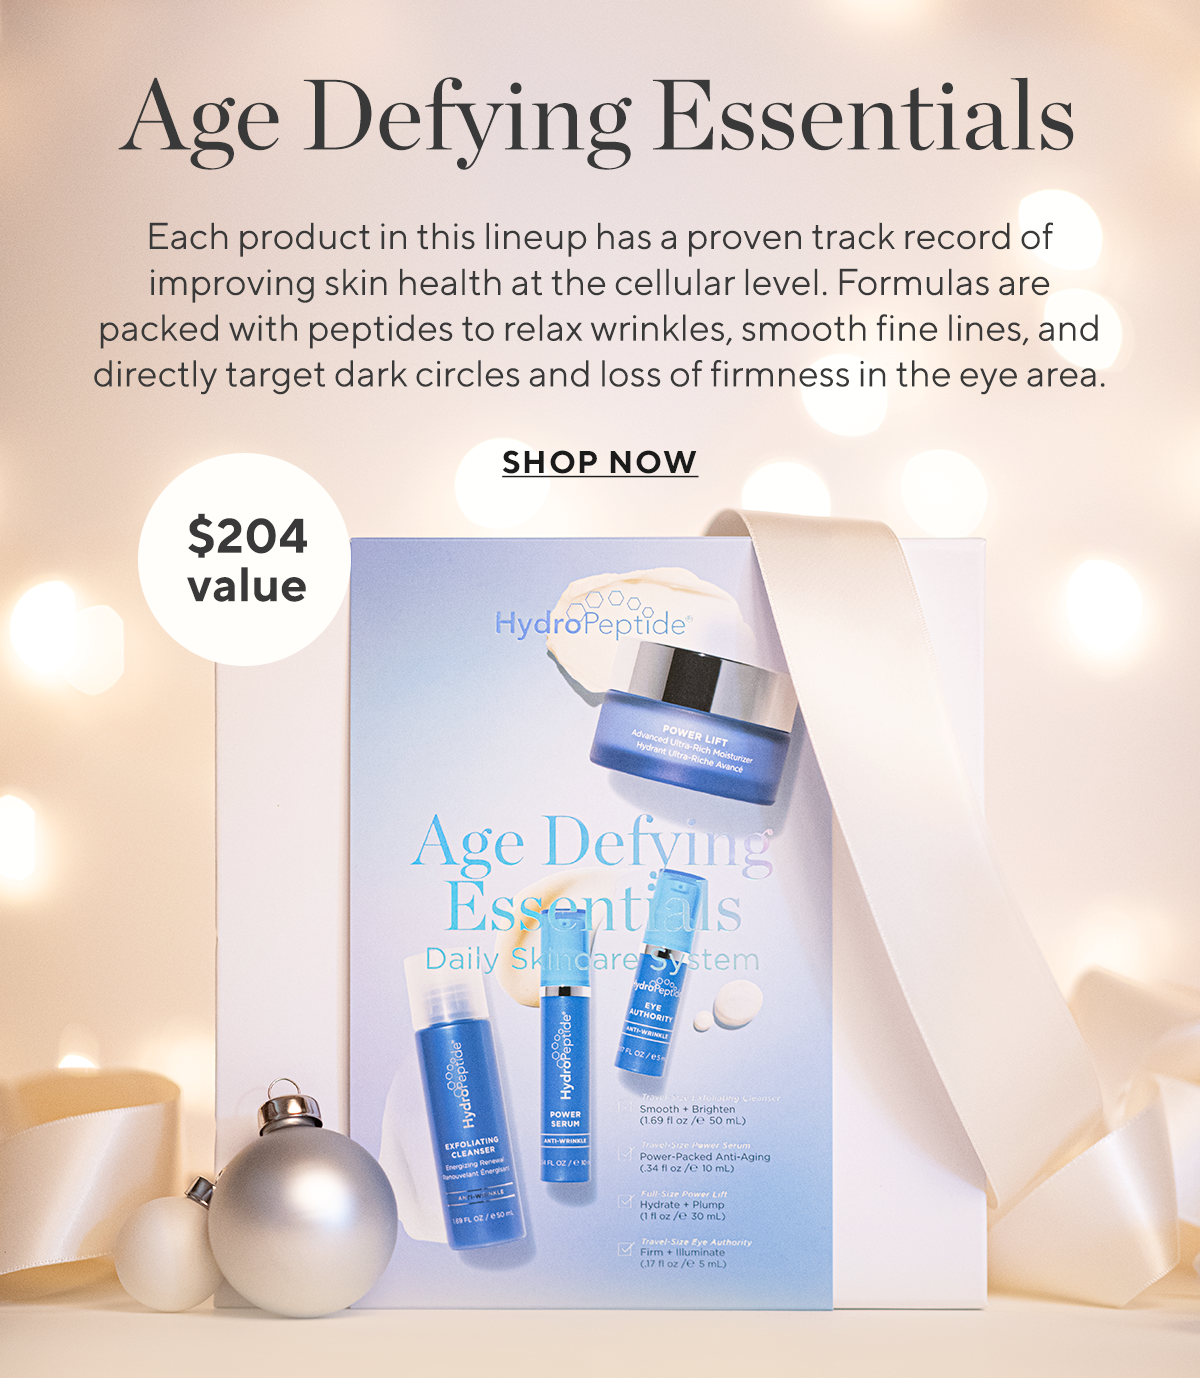 Our limited edition Age Defying Essentials holiday kit is just $149 ($207 value) 